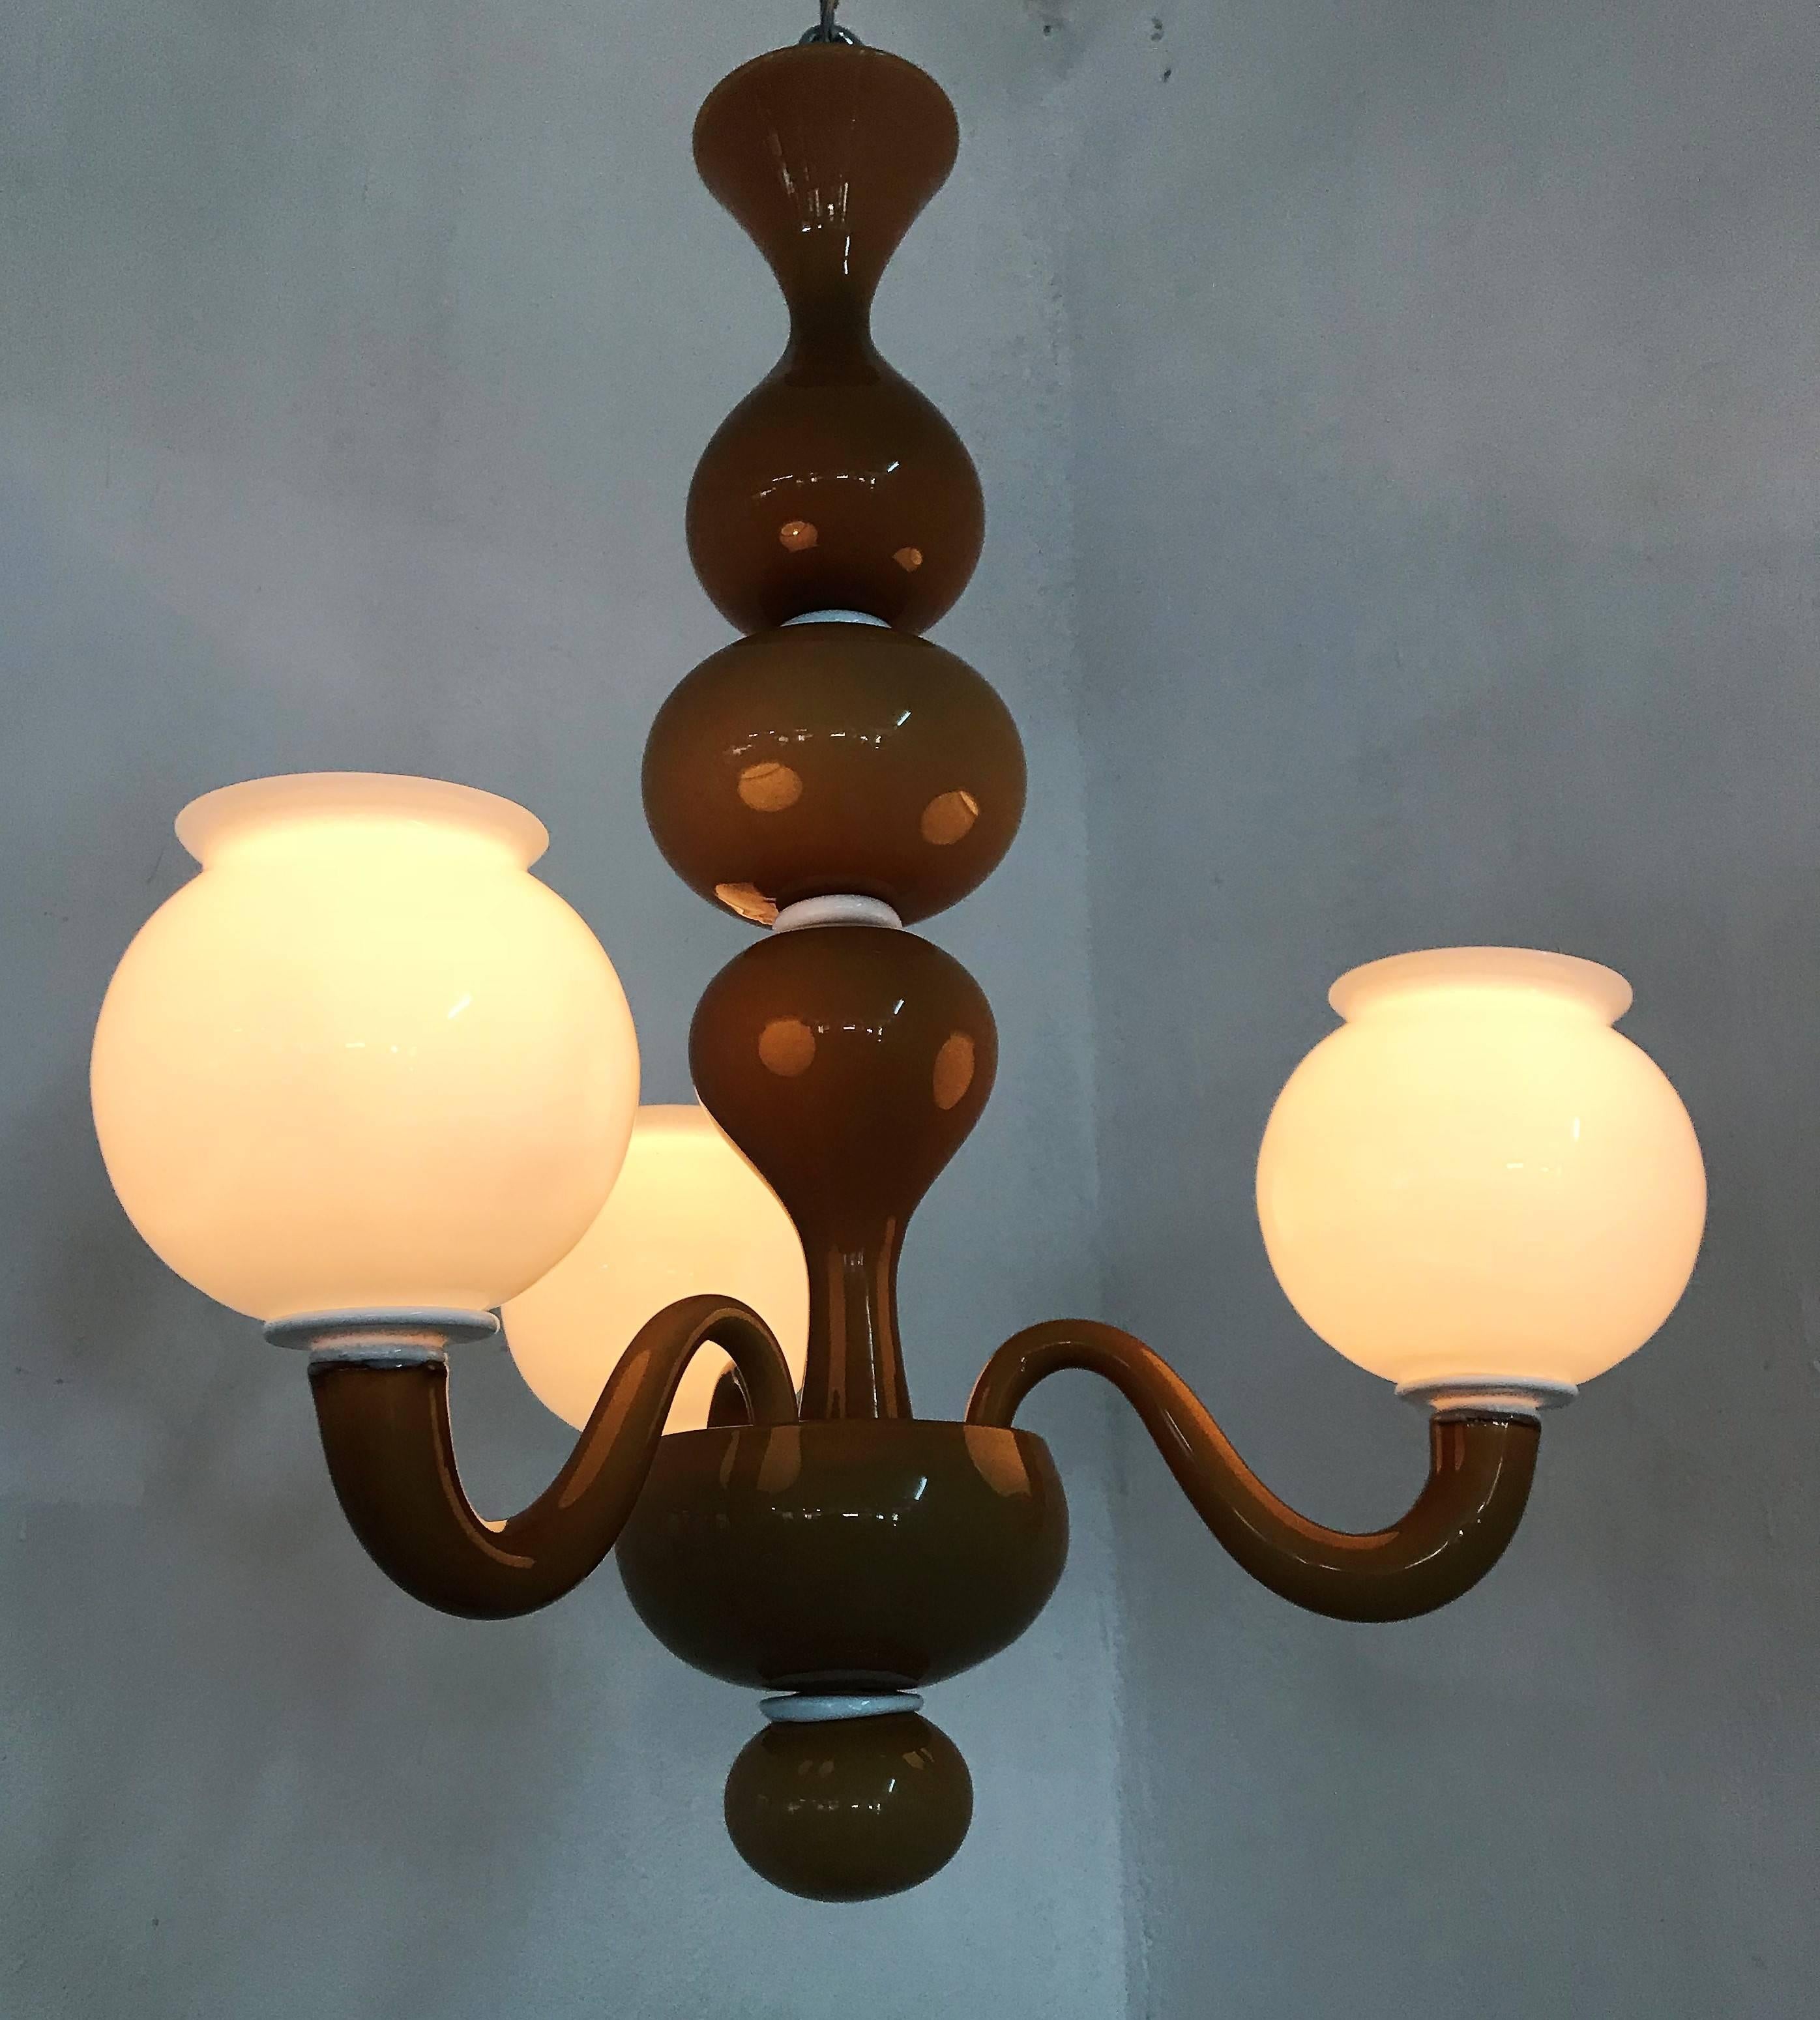 Small three-light chandelier signed by Venini in a dark, near-solid, amber/brown Lattimo Murano glass in Art deco style, circa 1930-1940.
This model has a number reference in Venini's archives as 960/12-3